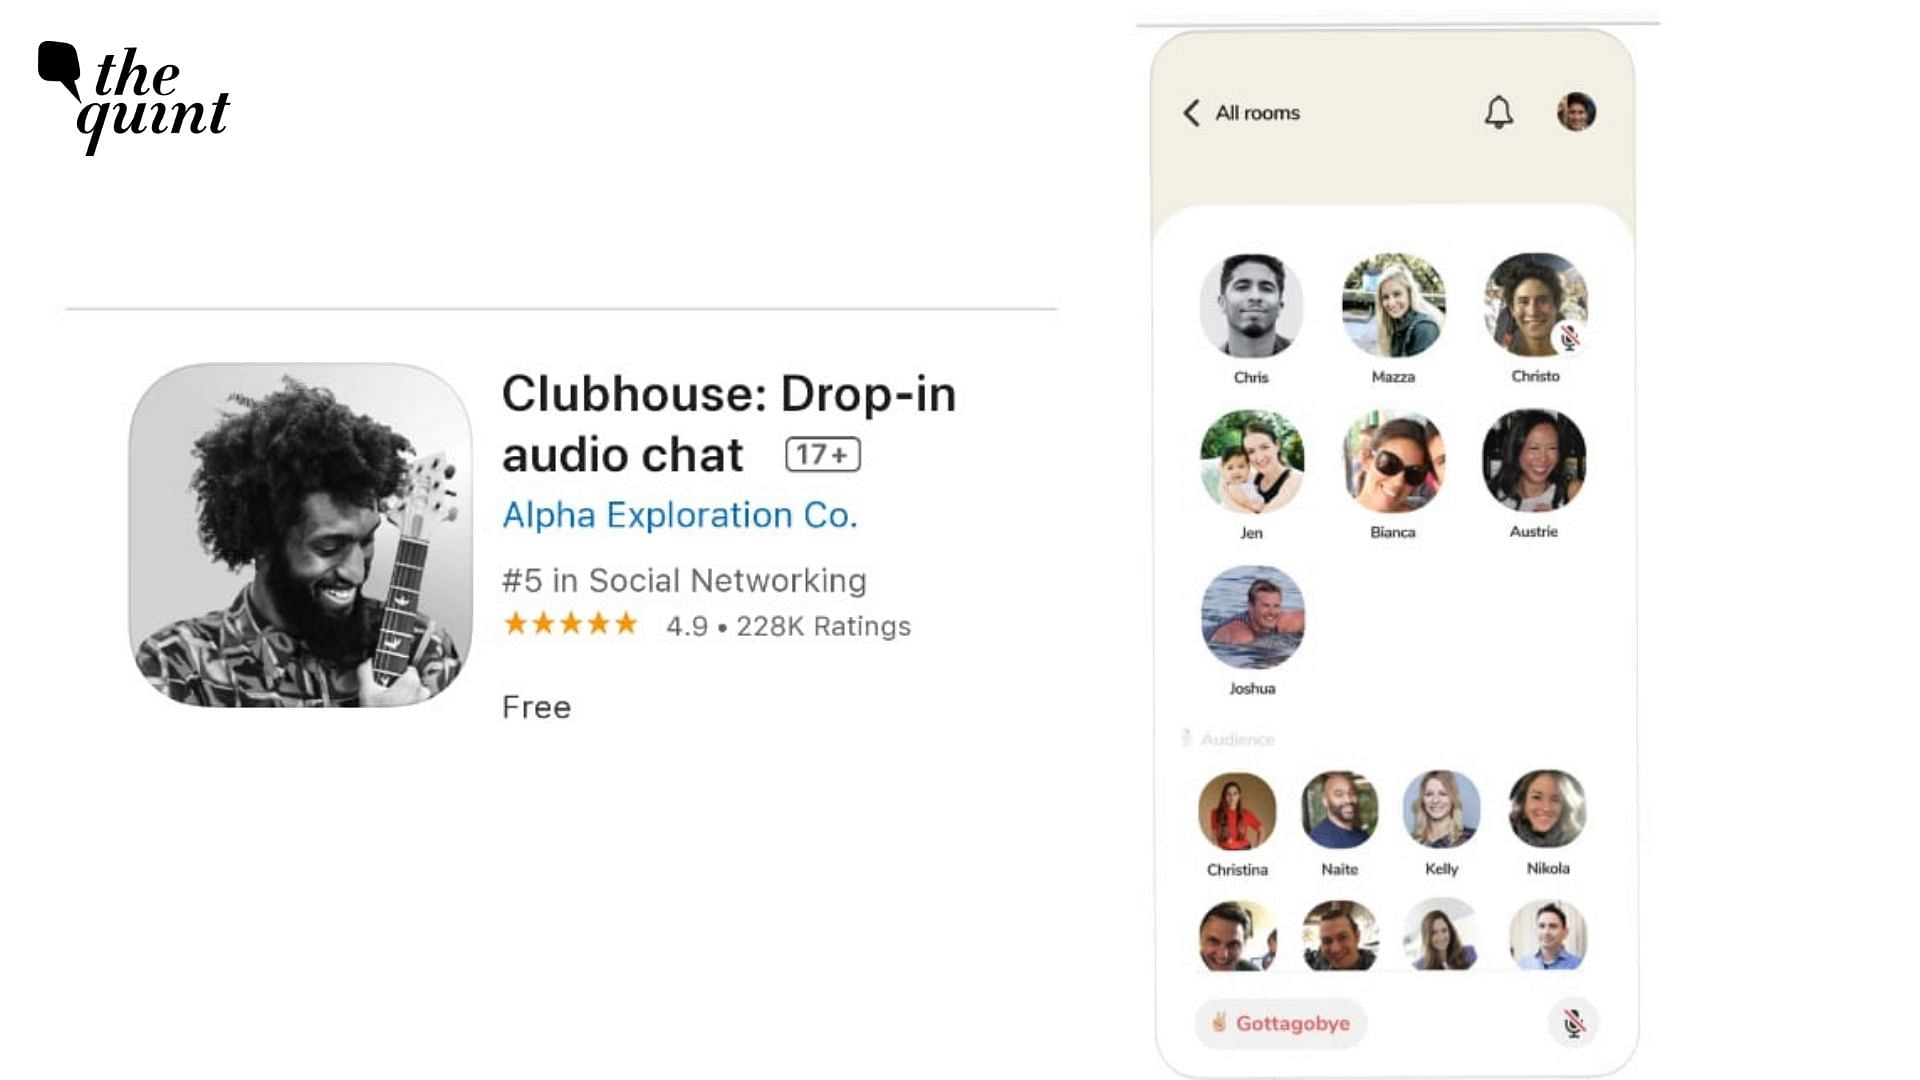 Clubhouse is a voice-based app which is only available for iPhone users.